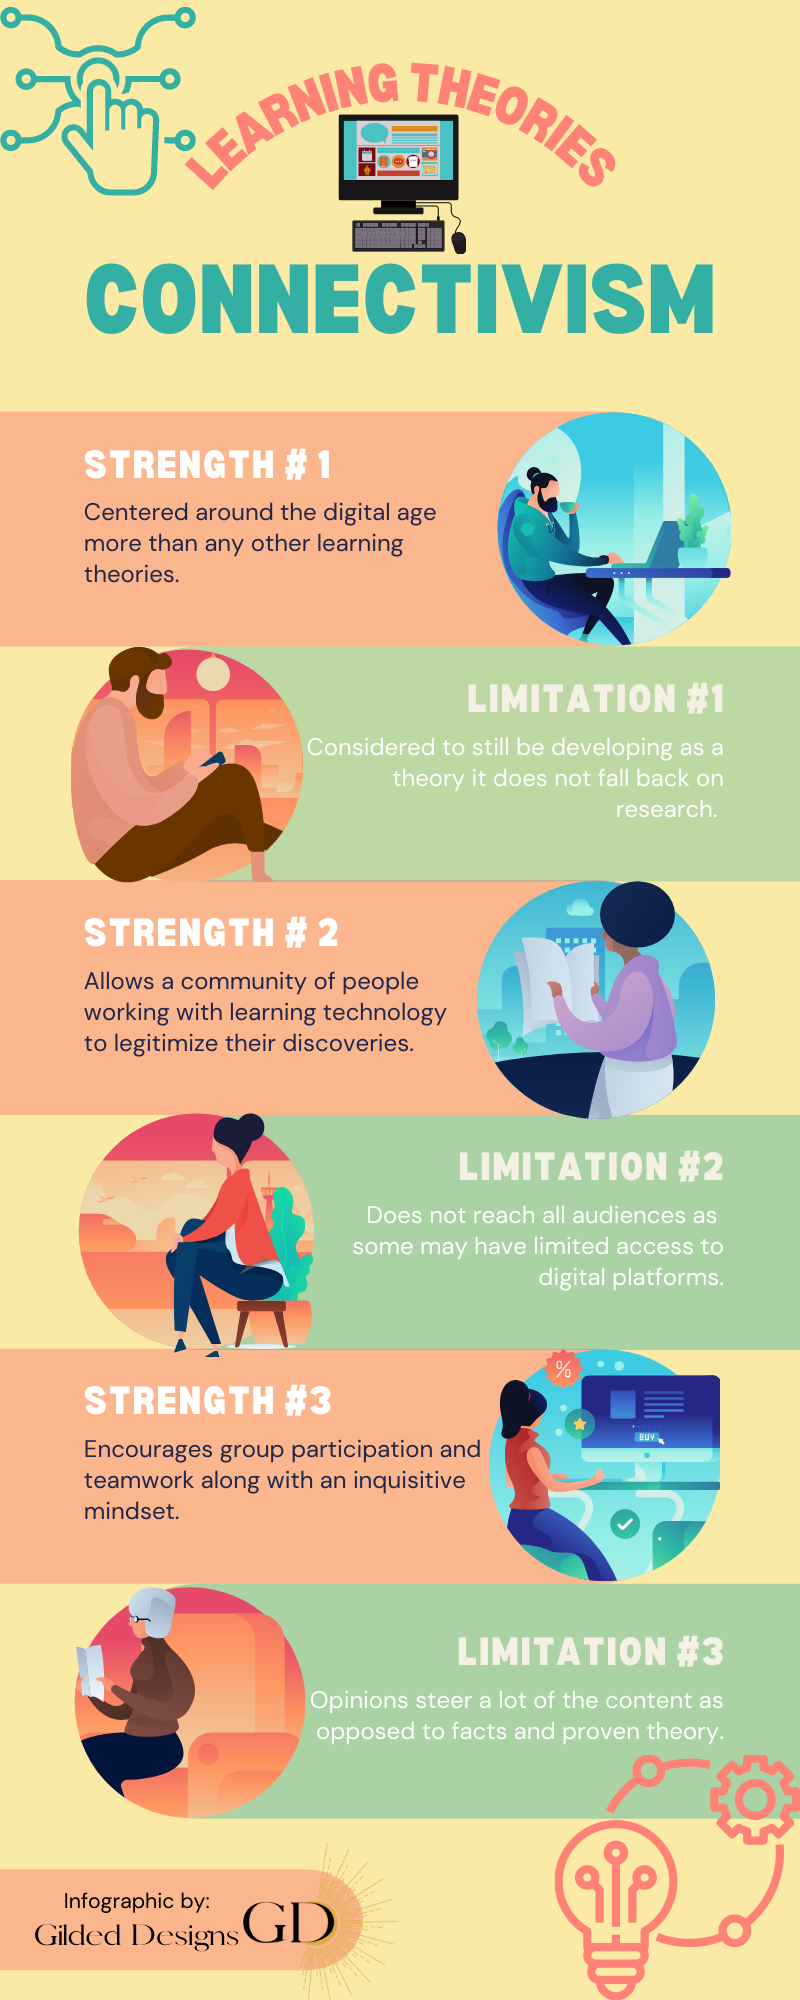 This infographic covers connectivism strengths and limitations